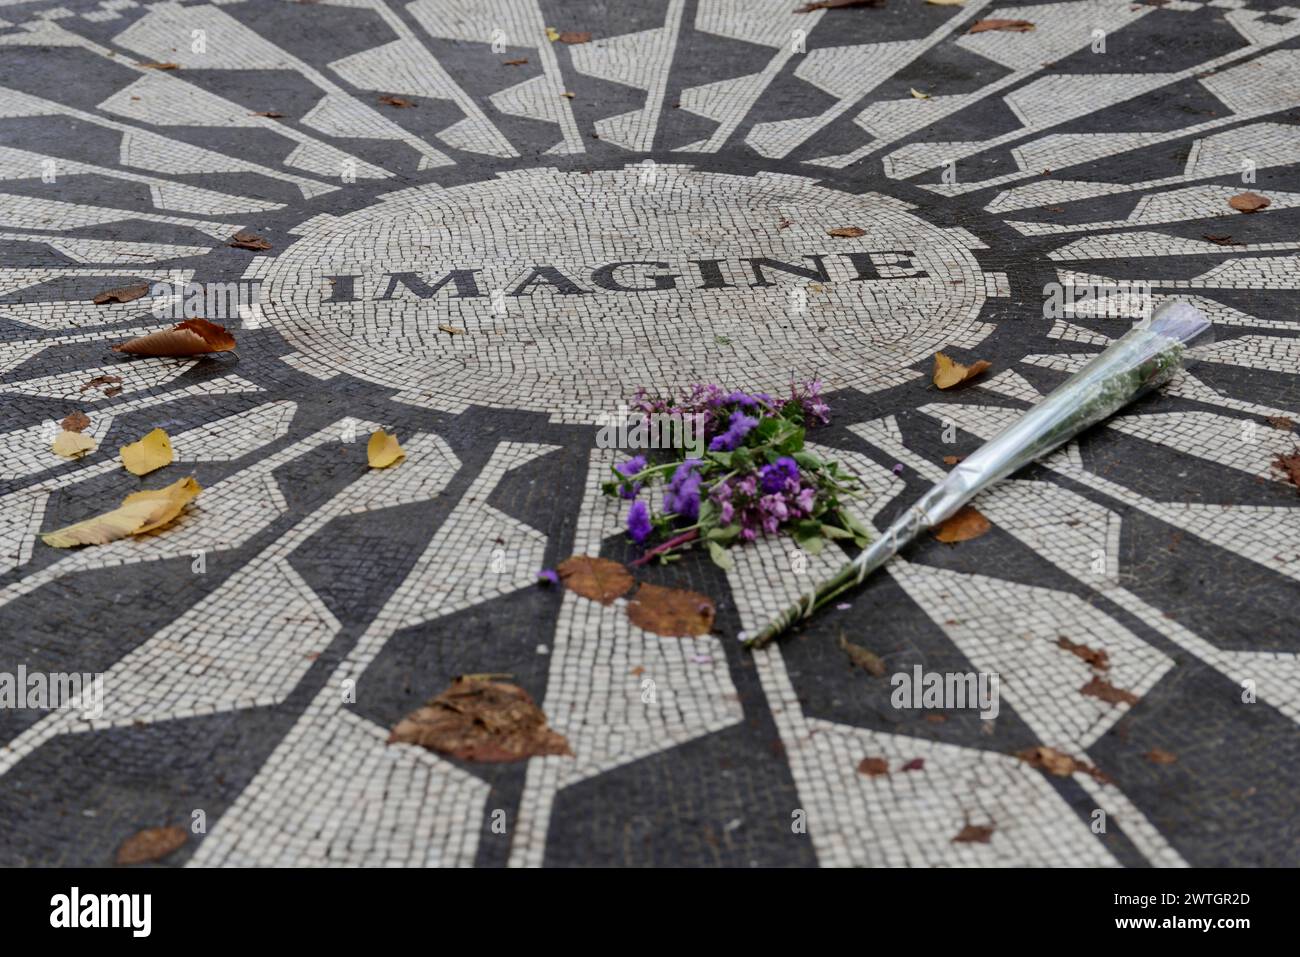 Central Park, street mosaic with the word Imagine surrounded by autumn leaves and flowers as a tribute, Manhattan, New York City, New York, USA Stock Photo